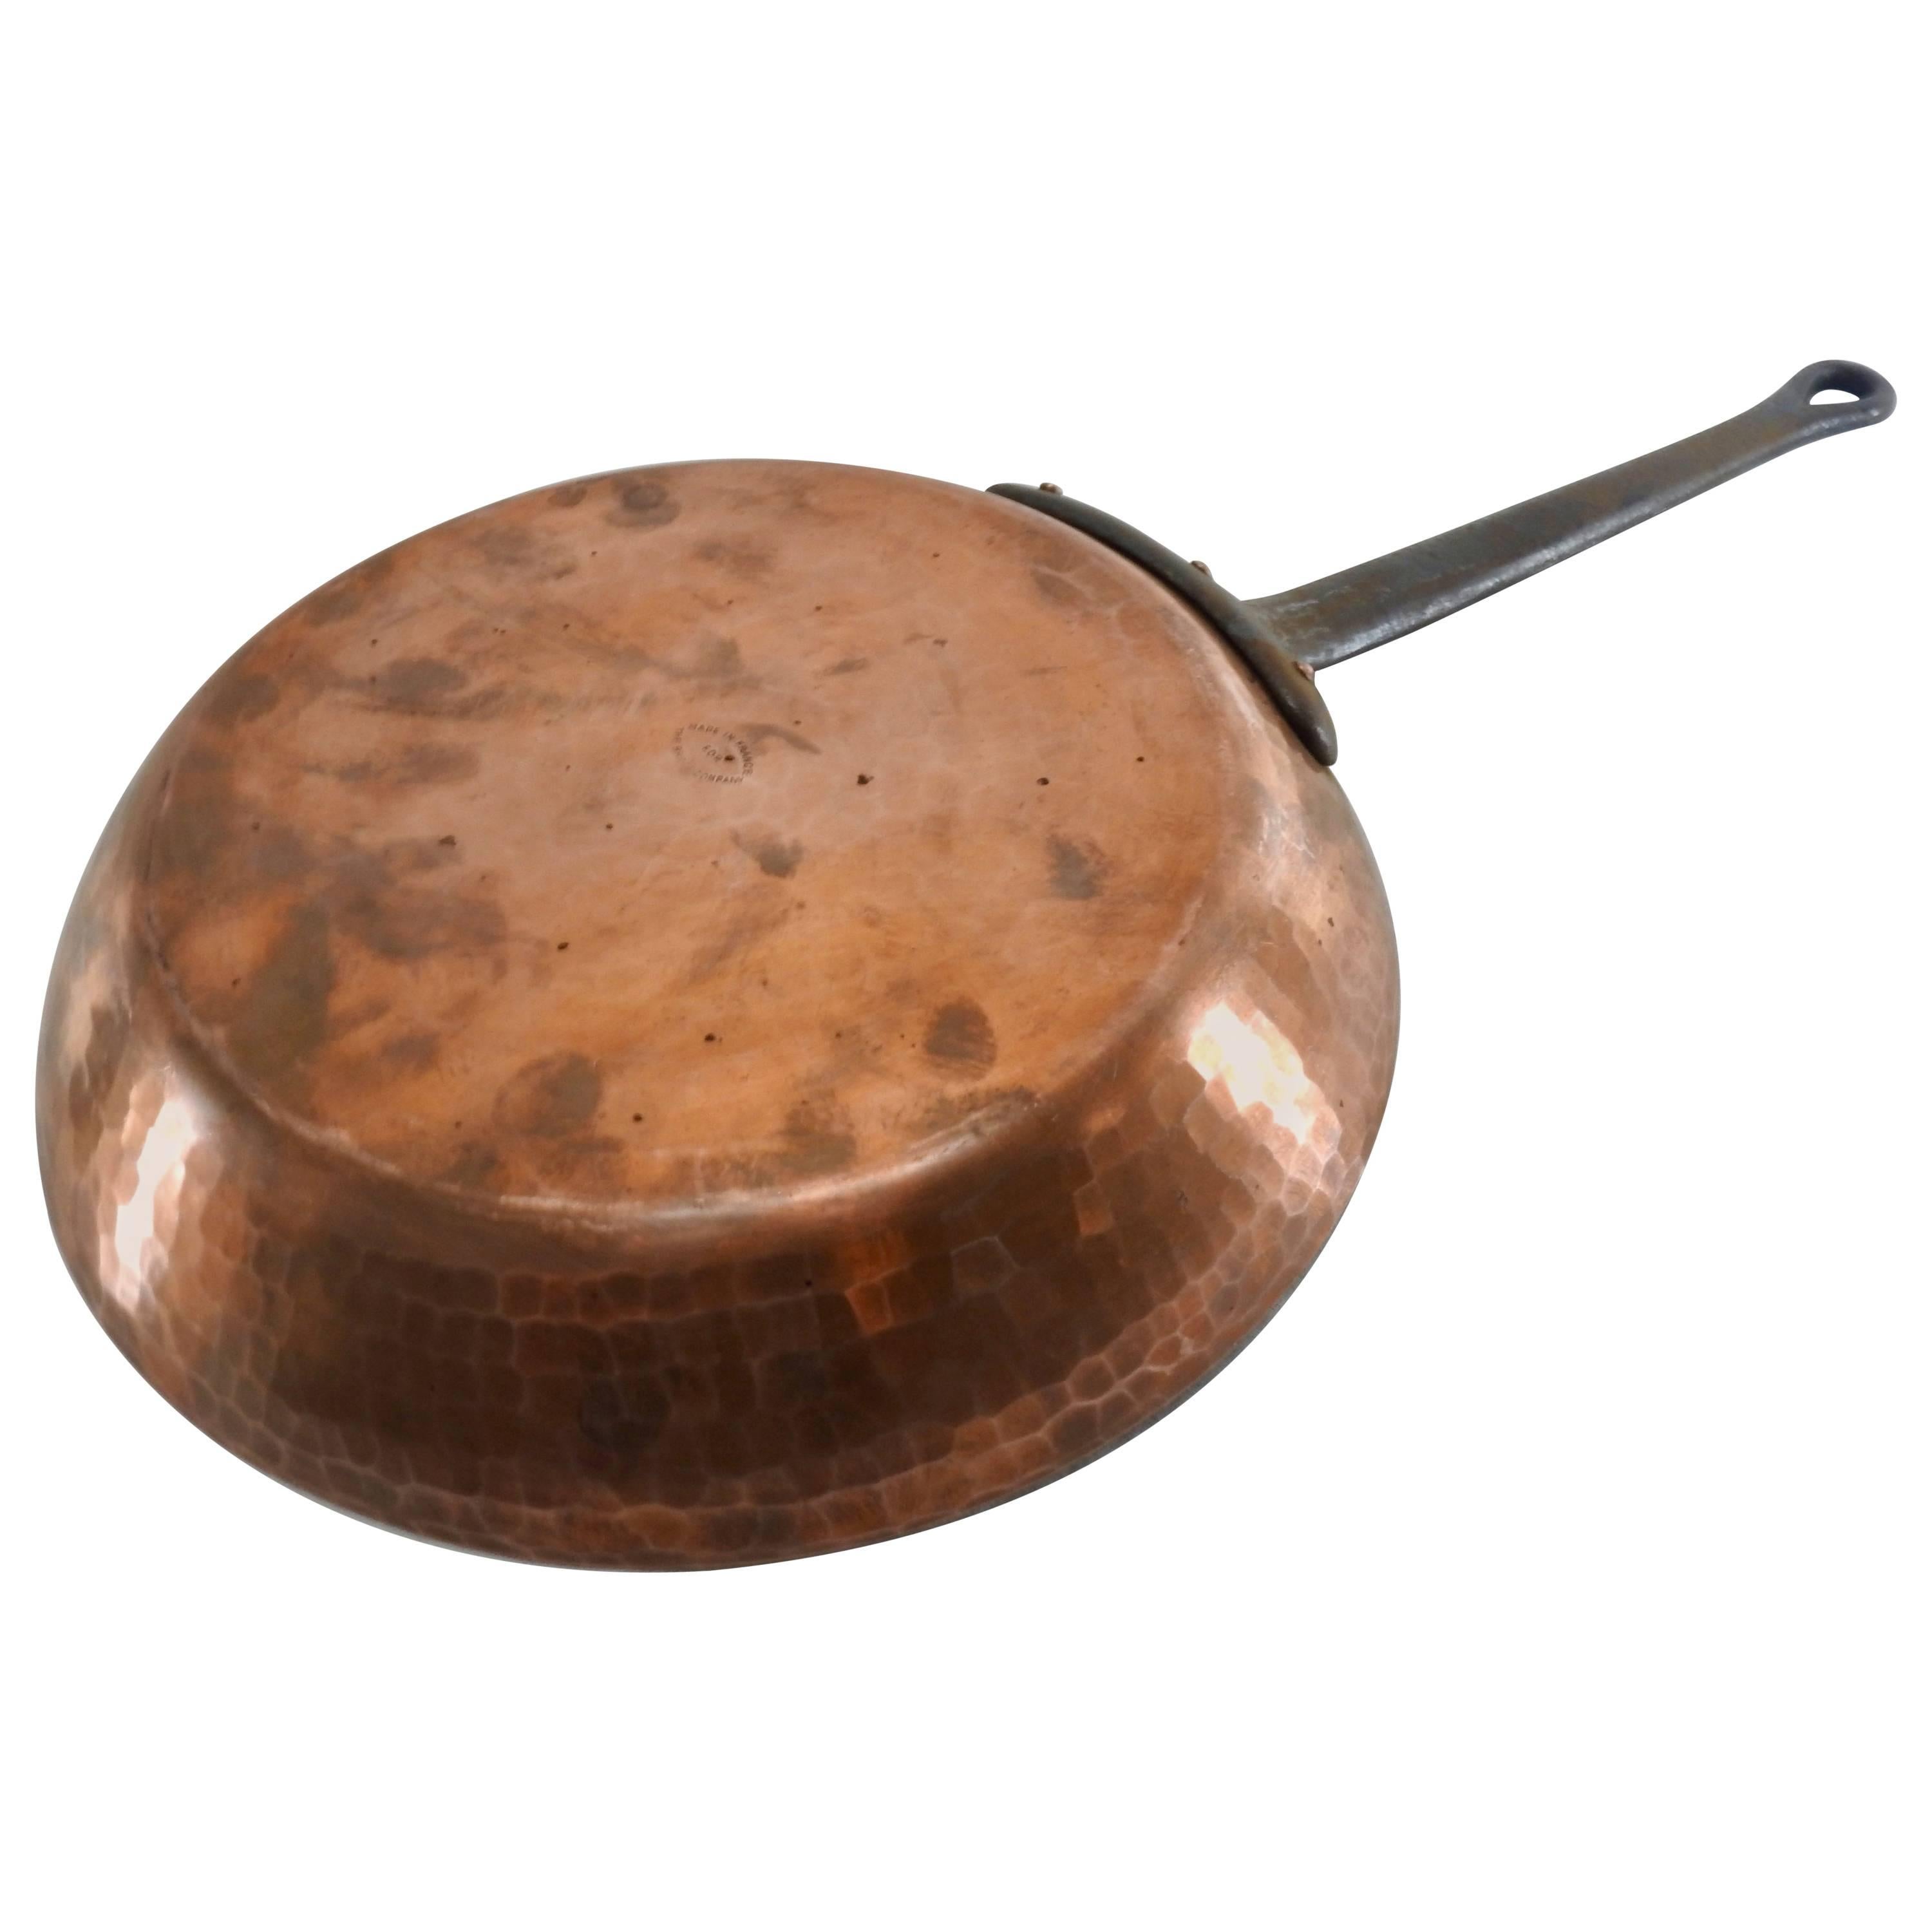 Hammered copper gives this frying pan character. A long cast iron handle is attached. The pan is marked 